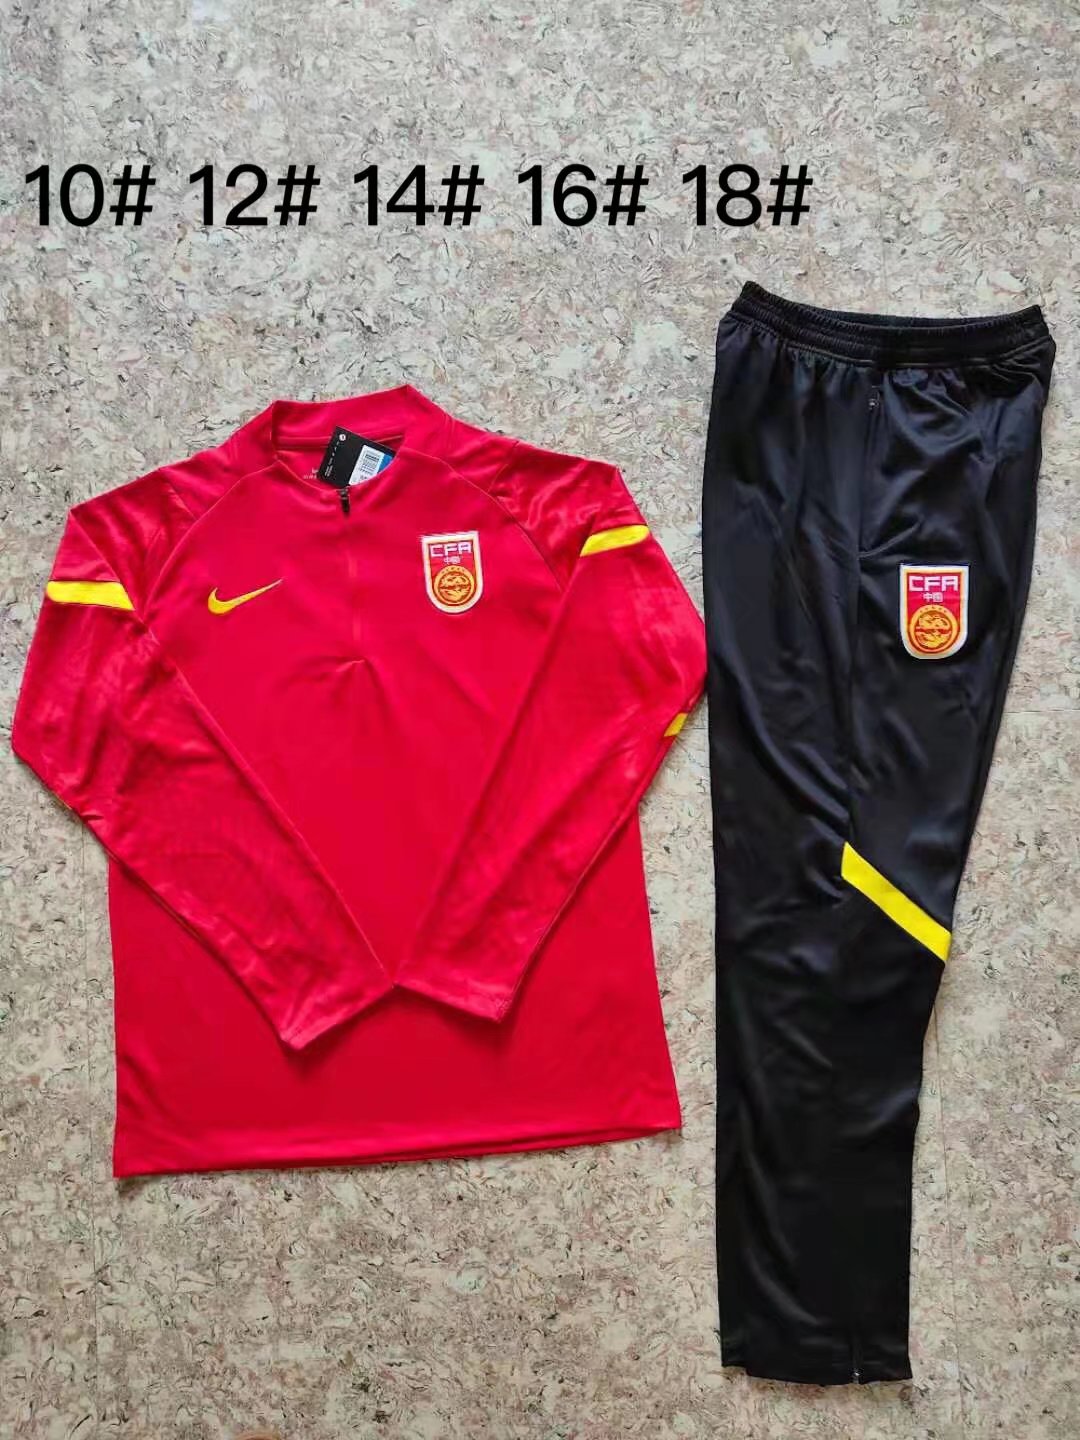 Kids/Youth 2021-22 China PR Red Thailand Soccer Tracksuit Uniform-2038